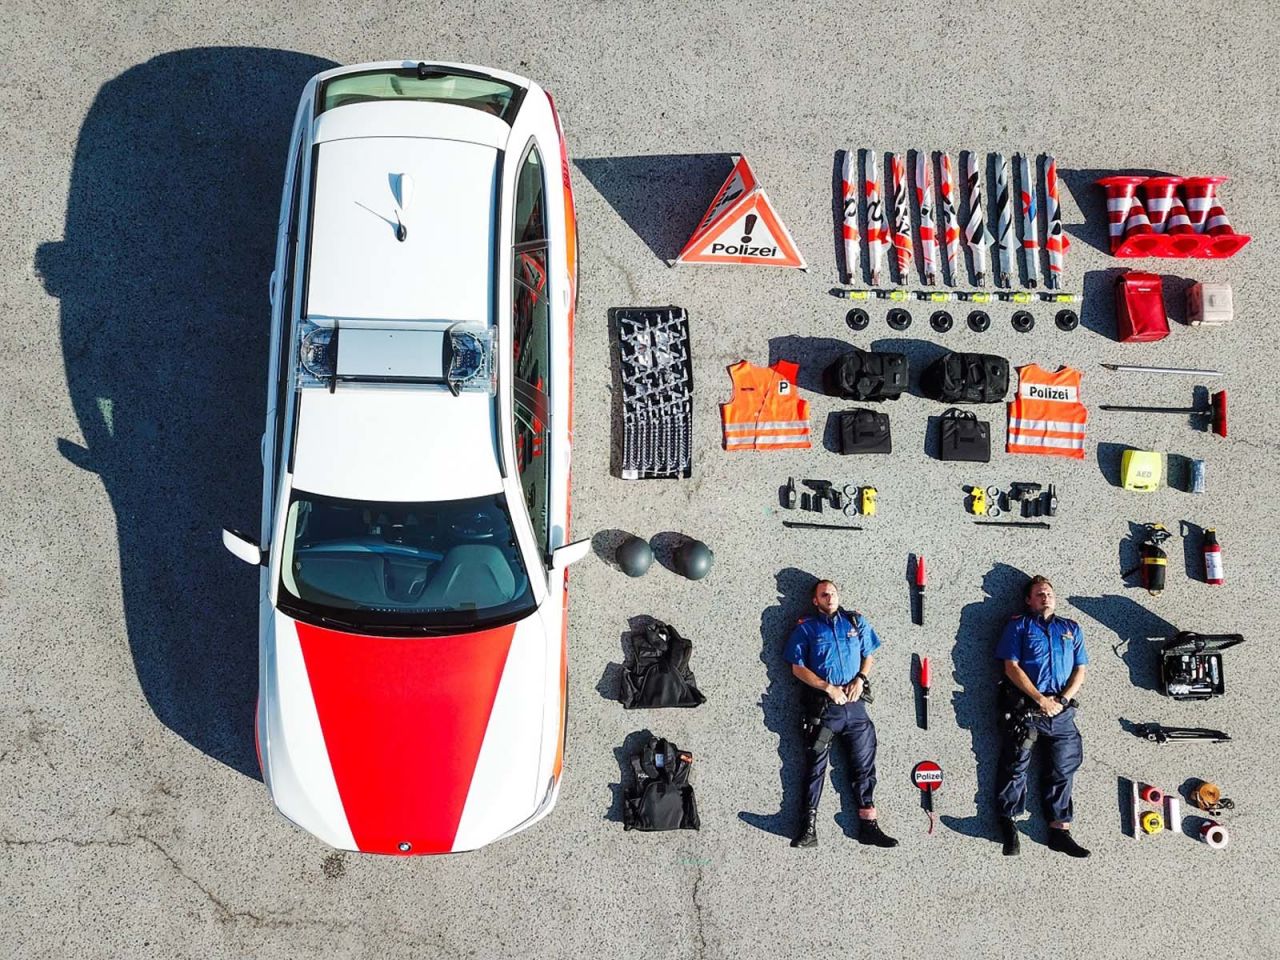 The so-called Tetris Challenge started September 1 when Zurich police published this bird's eye image on social media. It captured two officers on the ground beside the contents of their car laid out in neat, geometric block patterns, like in the popular 1980s video game Tetris. Since then, public services units from around the world have followed suit, photographing their work equipment in rows beside their vehicles. Click through to see more.